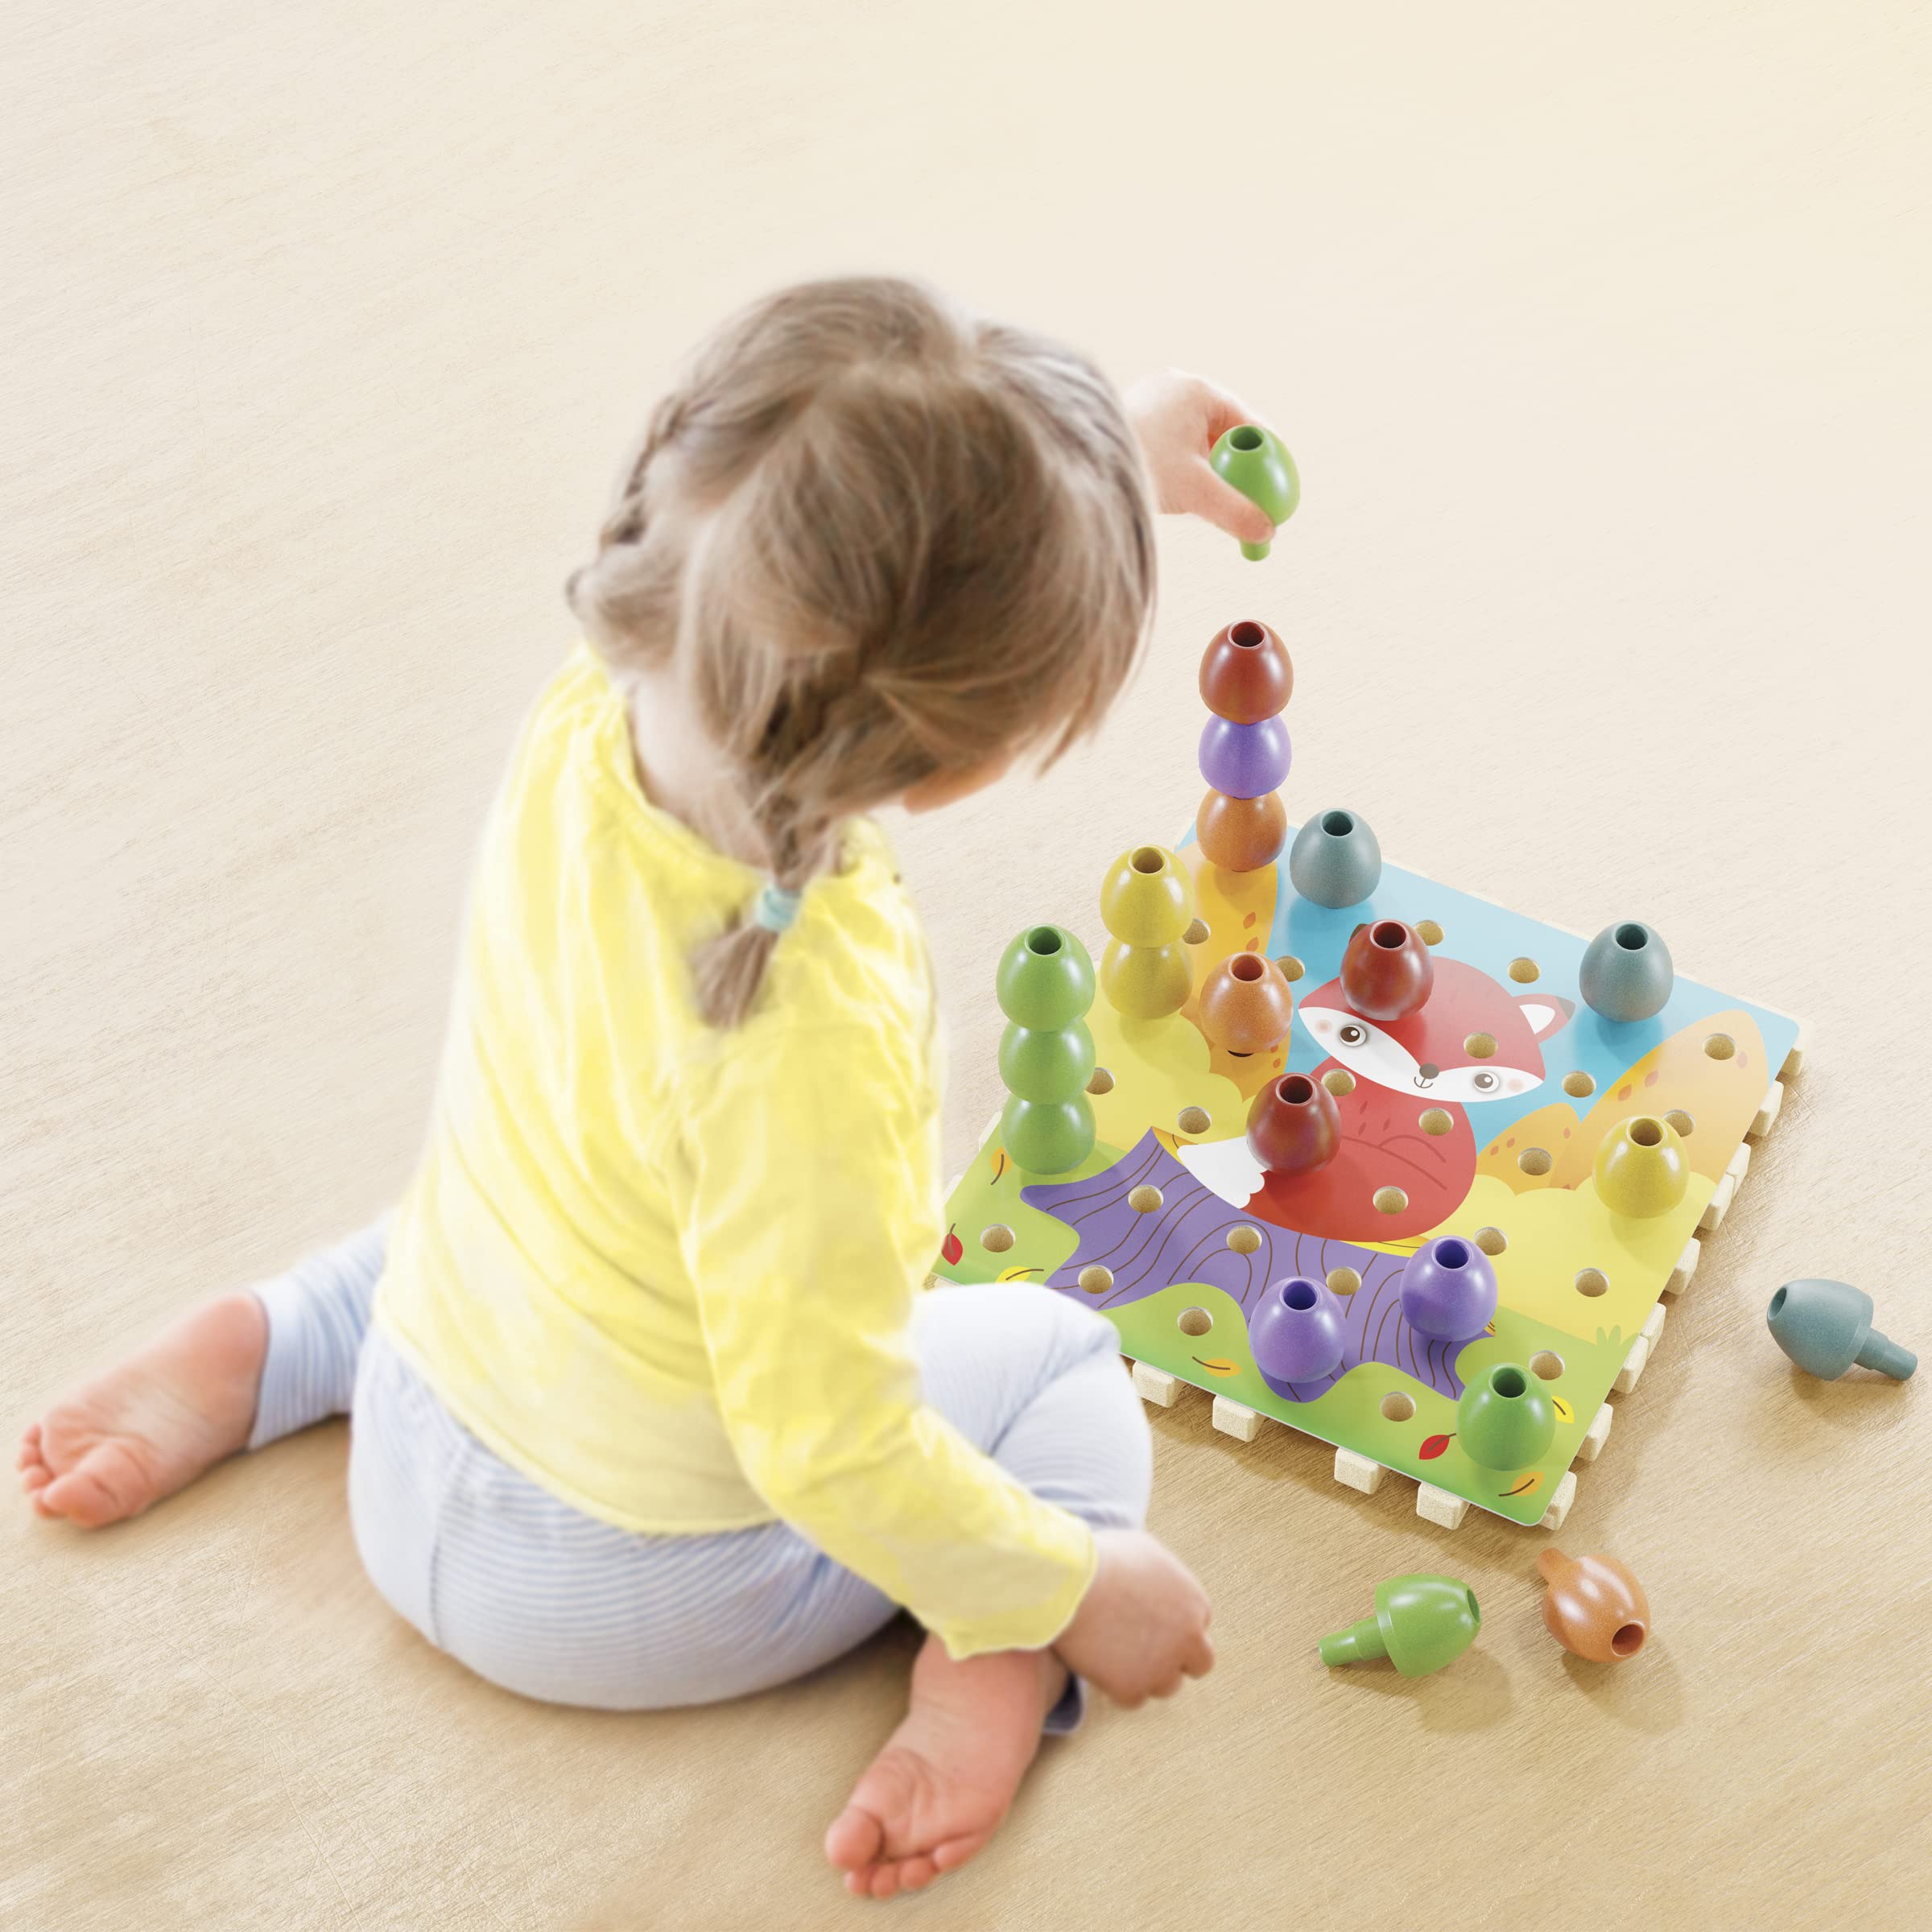 Quercetti PlayBio Jumbo Peggy Stacking Toy - 45 Piece Set Includes 36 Large Pegs in Natural Colors and 9 Interlocking Plates, for Kids Ages 2-5 Years, Multicolor